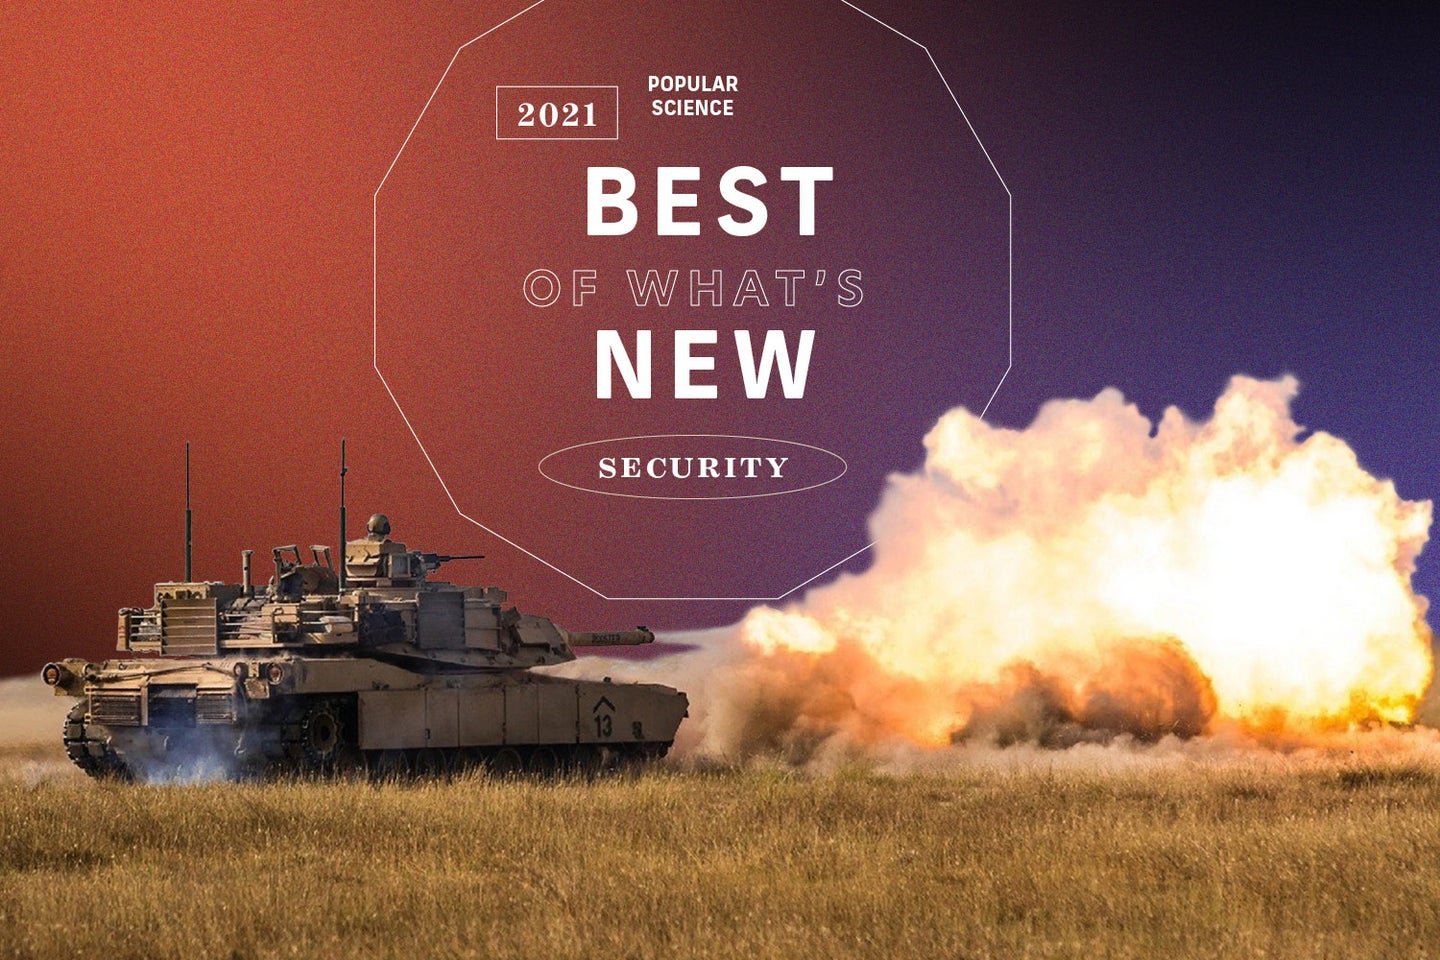 The most transformative security innovations of 2021